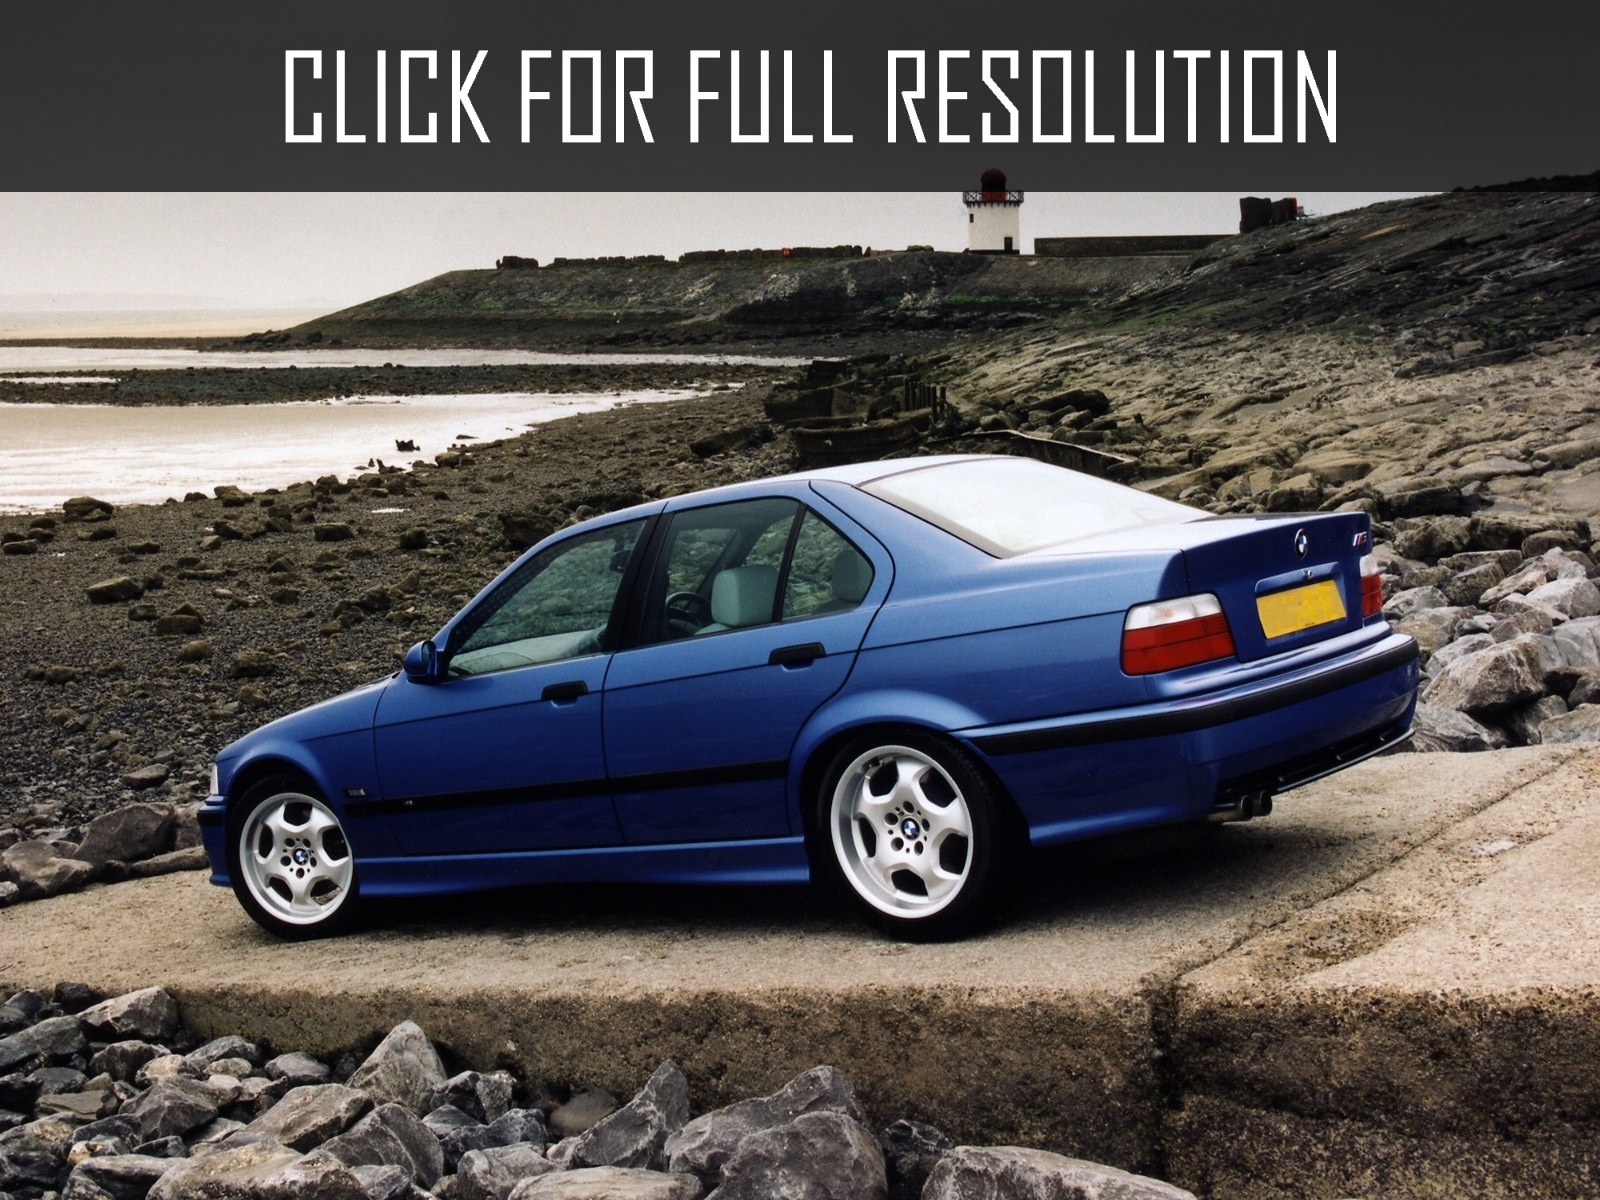 1995 Bmw Series best image gallery #9/16 - share download